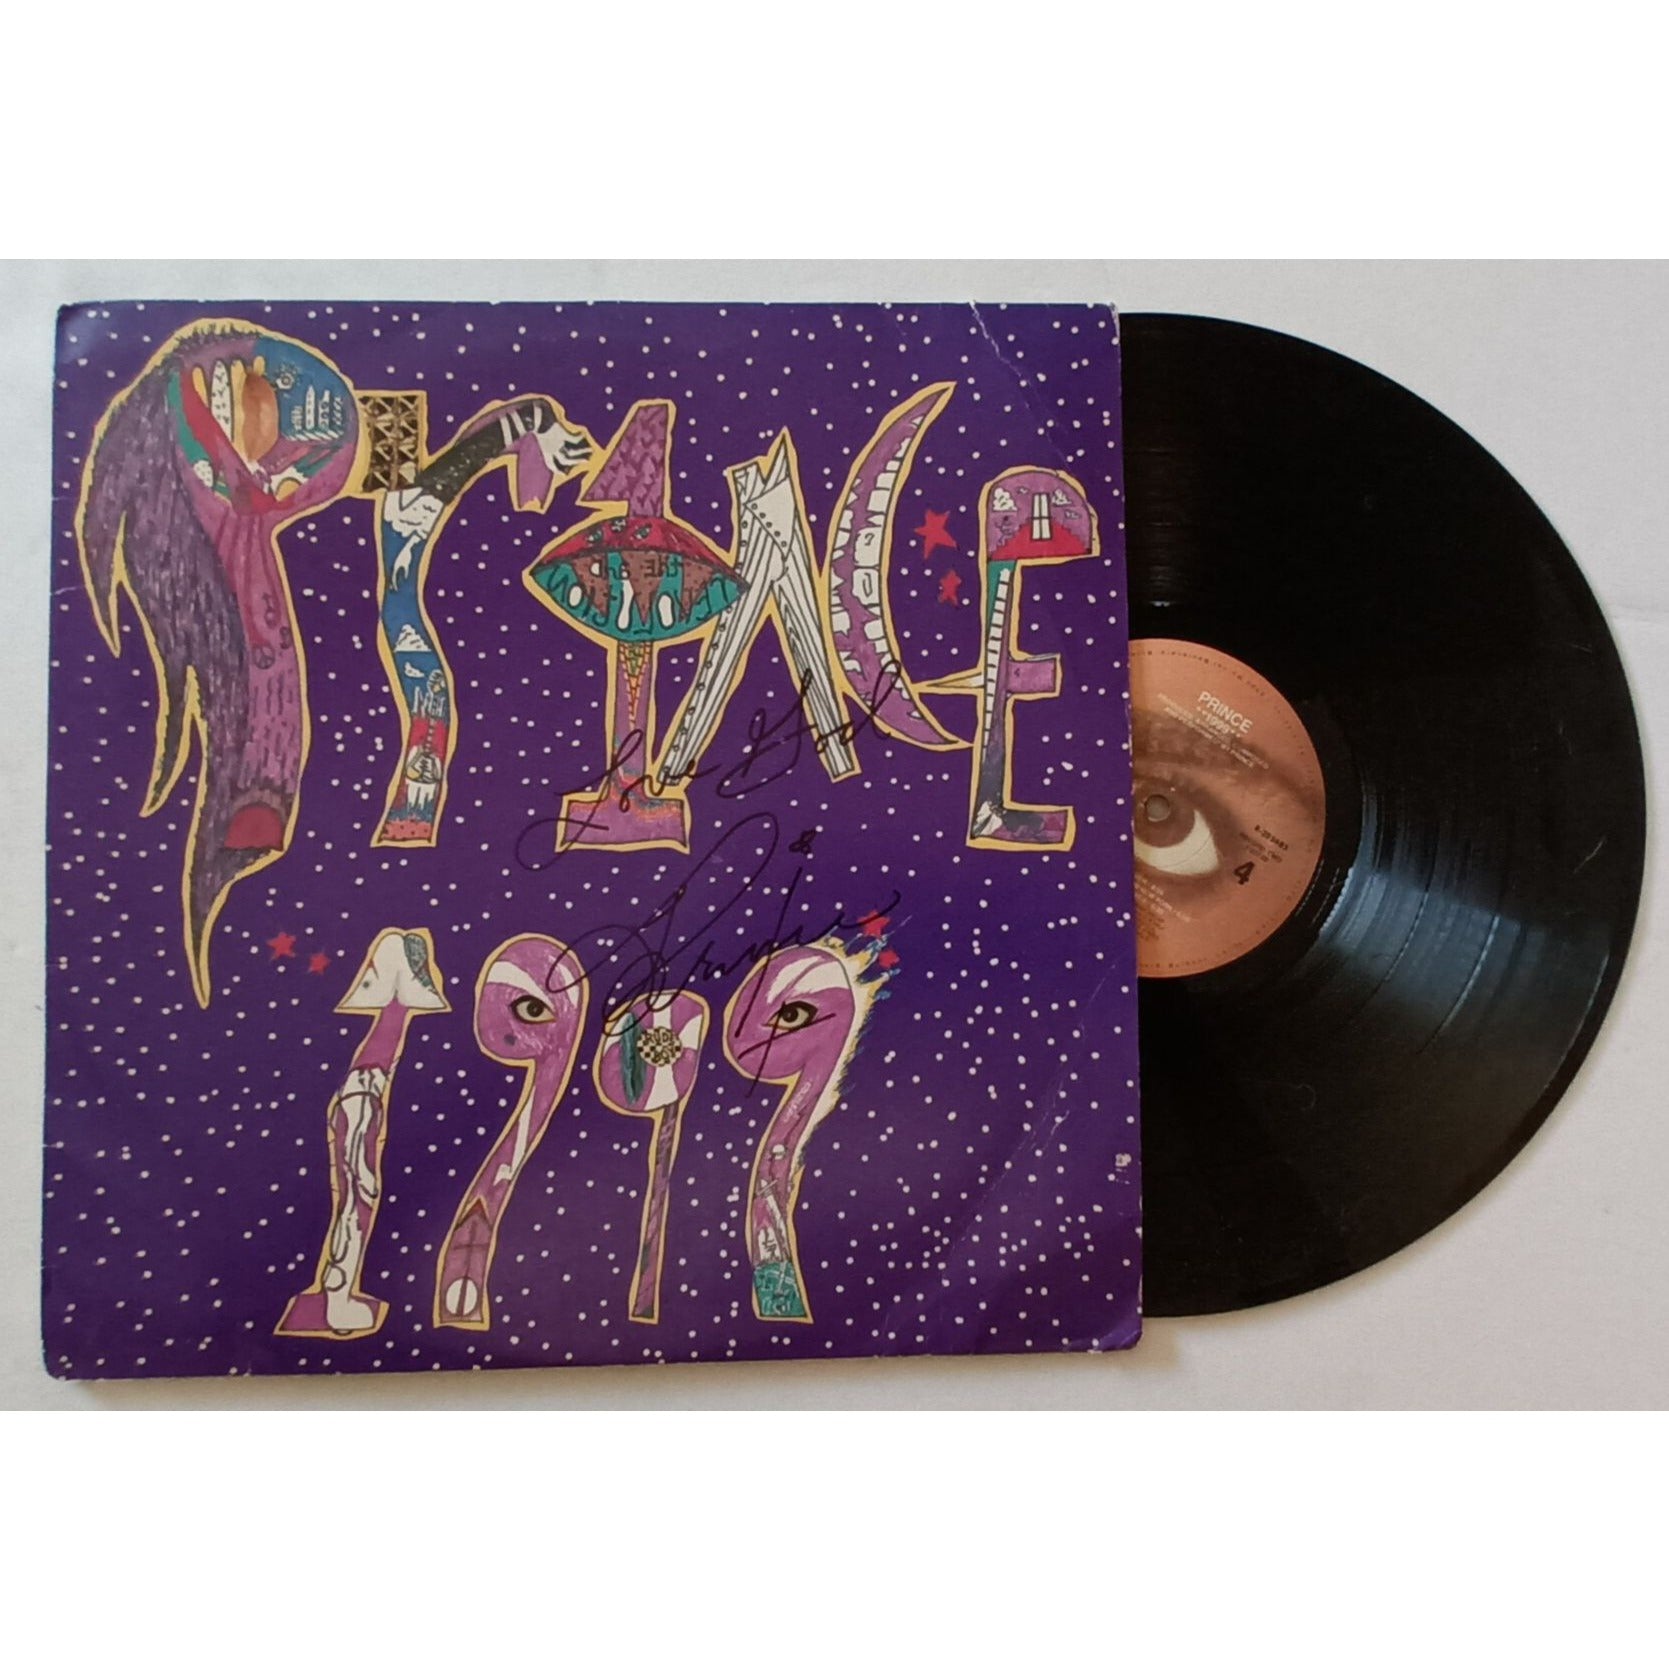 Prince Rogers Nelson 1999 original LP signed with proof